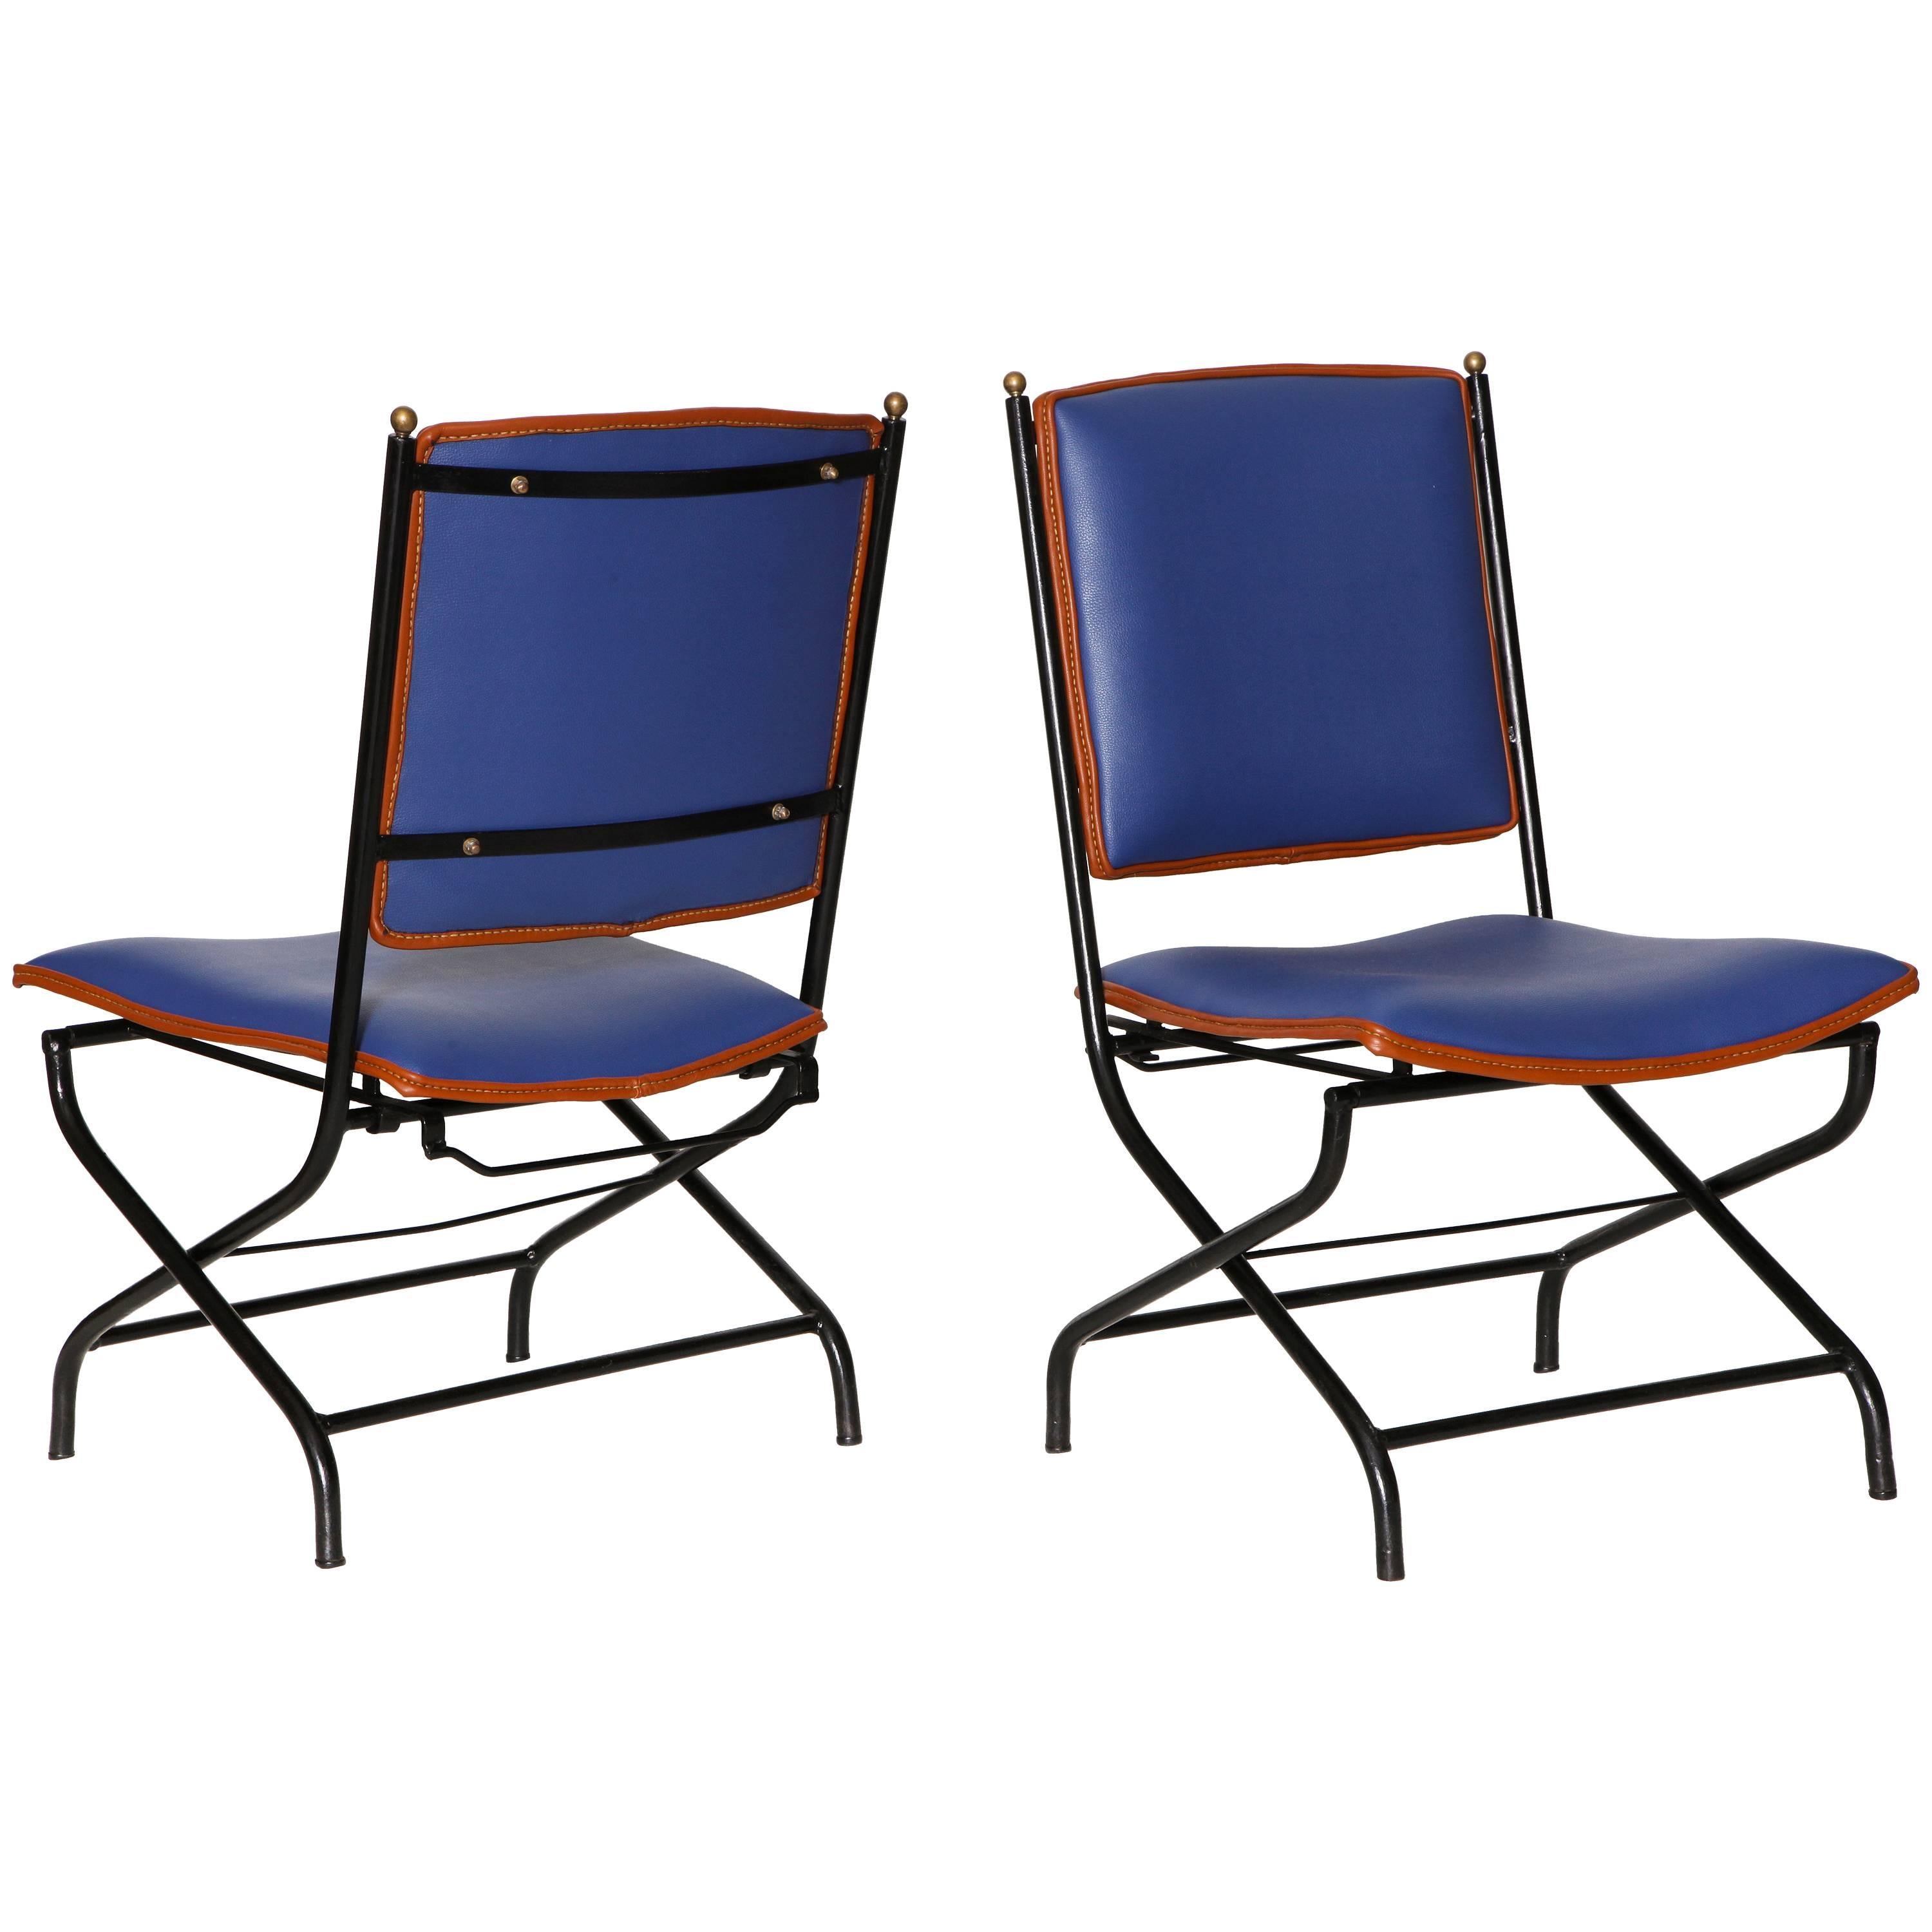 Jacques Adnet, Pair of leather and iron adjustable chairs, France, c. 1950